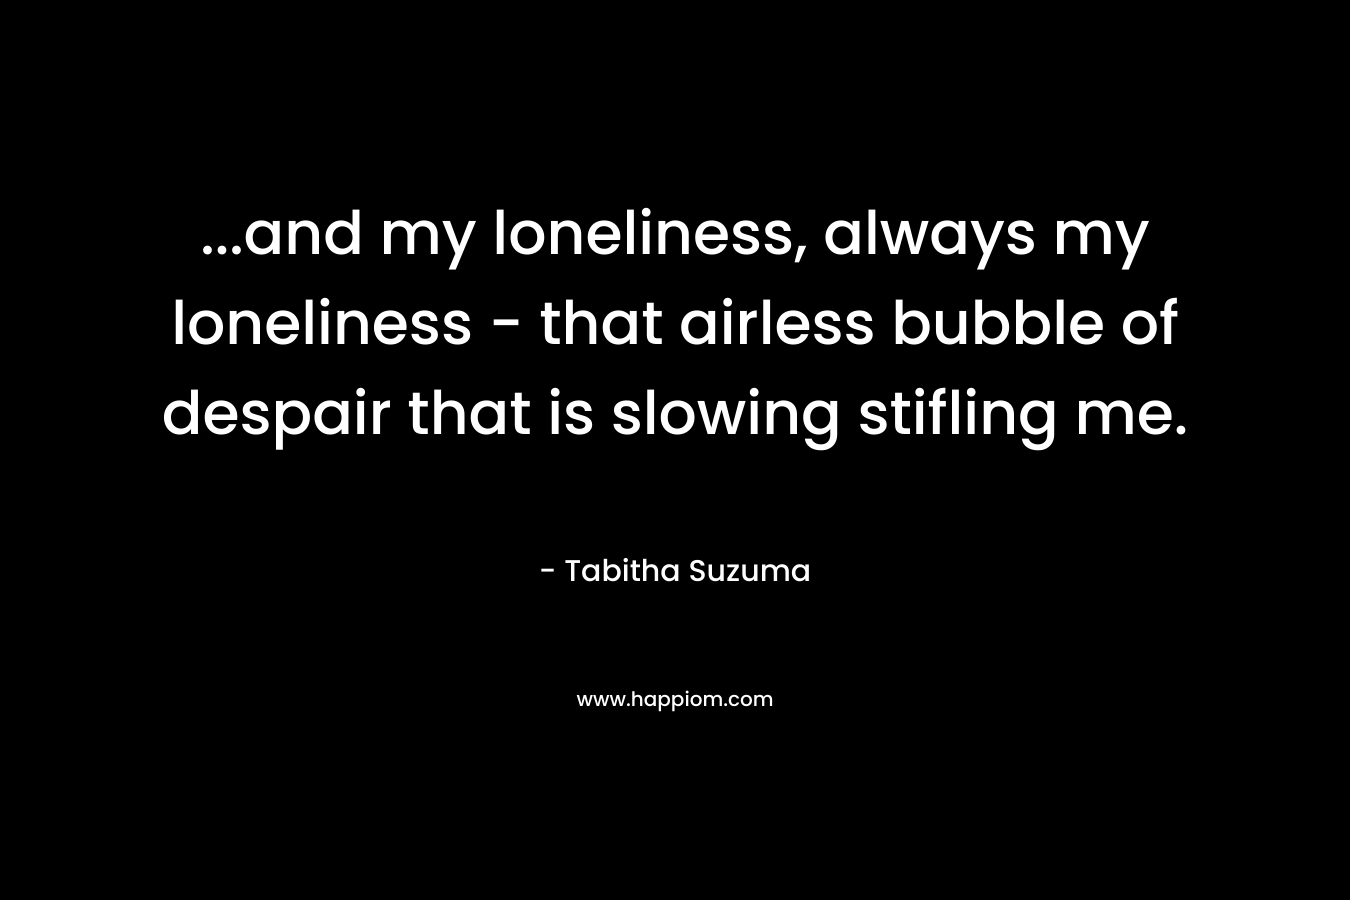 ...and my loneliness, always my loneliness - that airless bubble of despair that is slowing stifling me.